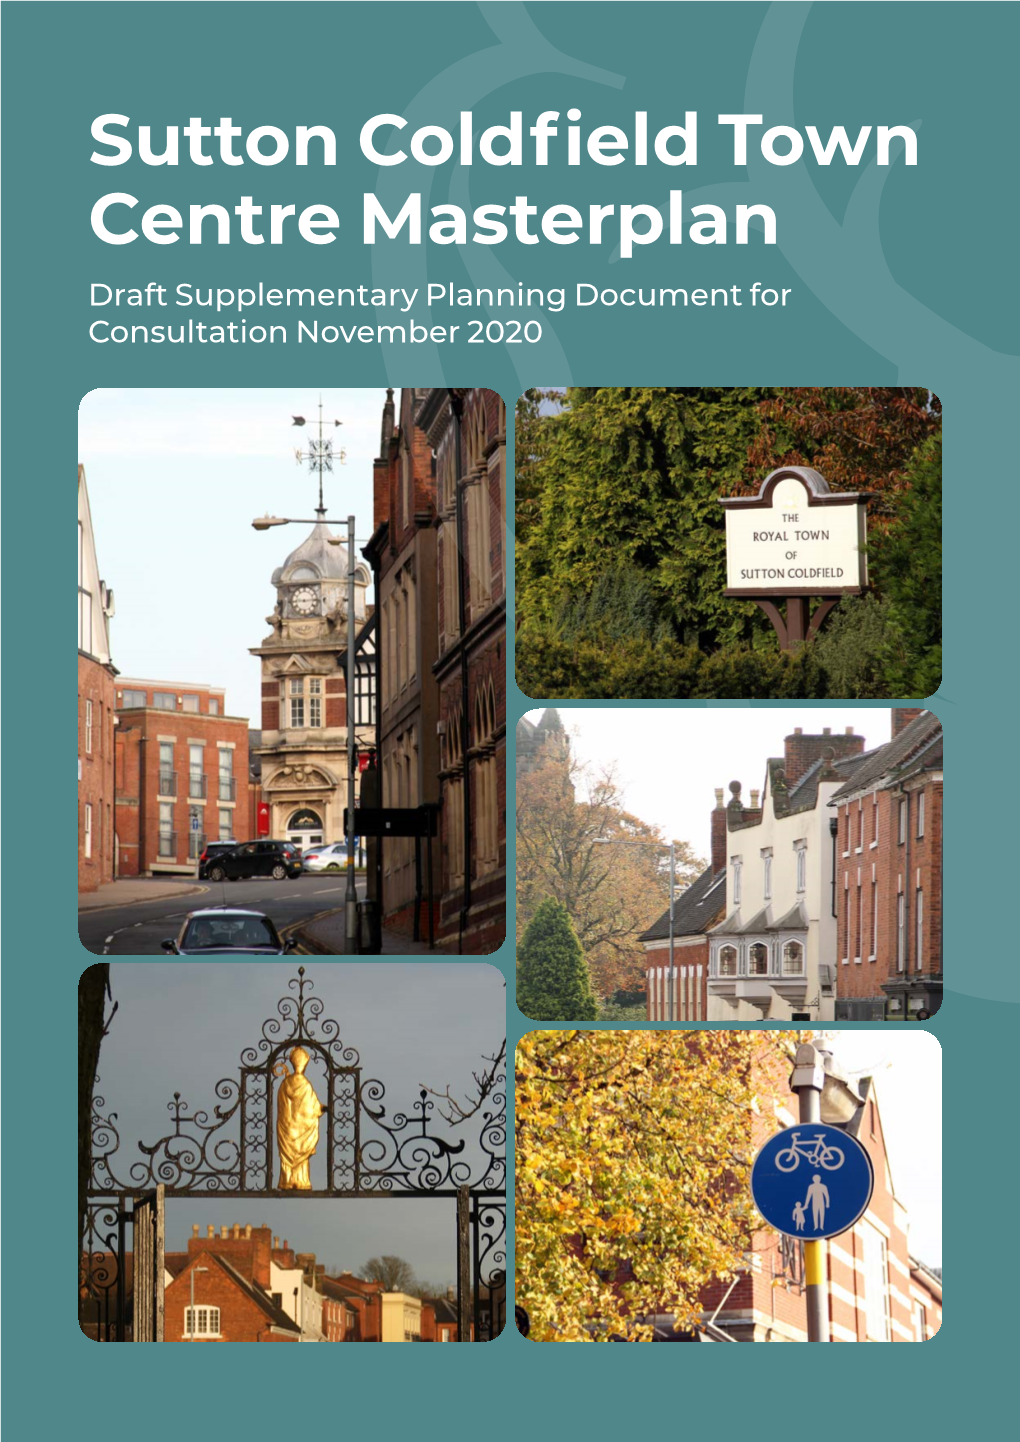 Sutton Coldfield Town Centre Masterplan Draft Supplementary Planning Document for Consultation November 2020 Prepared on Behalf of the TCRP By